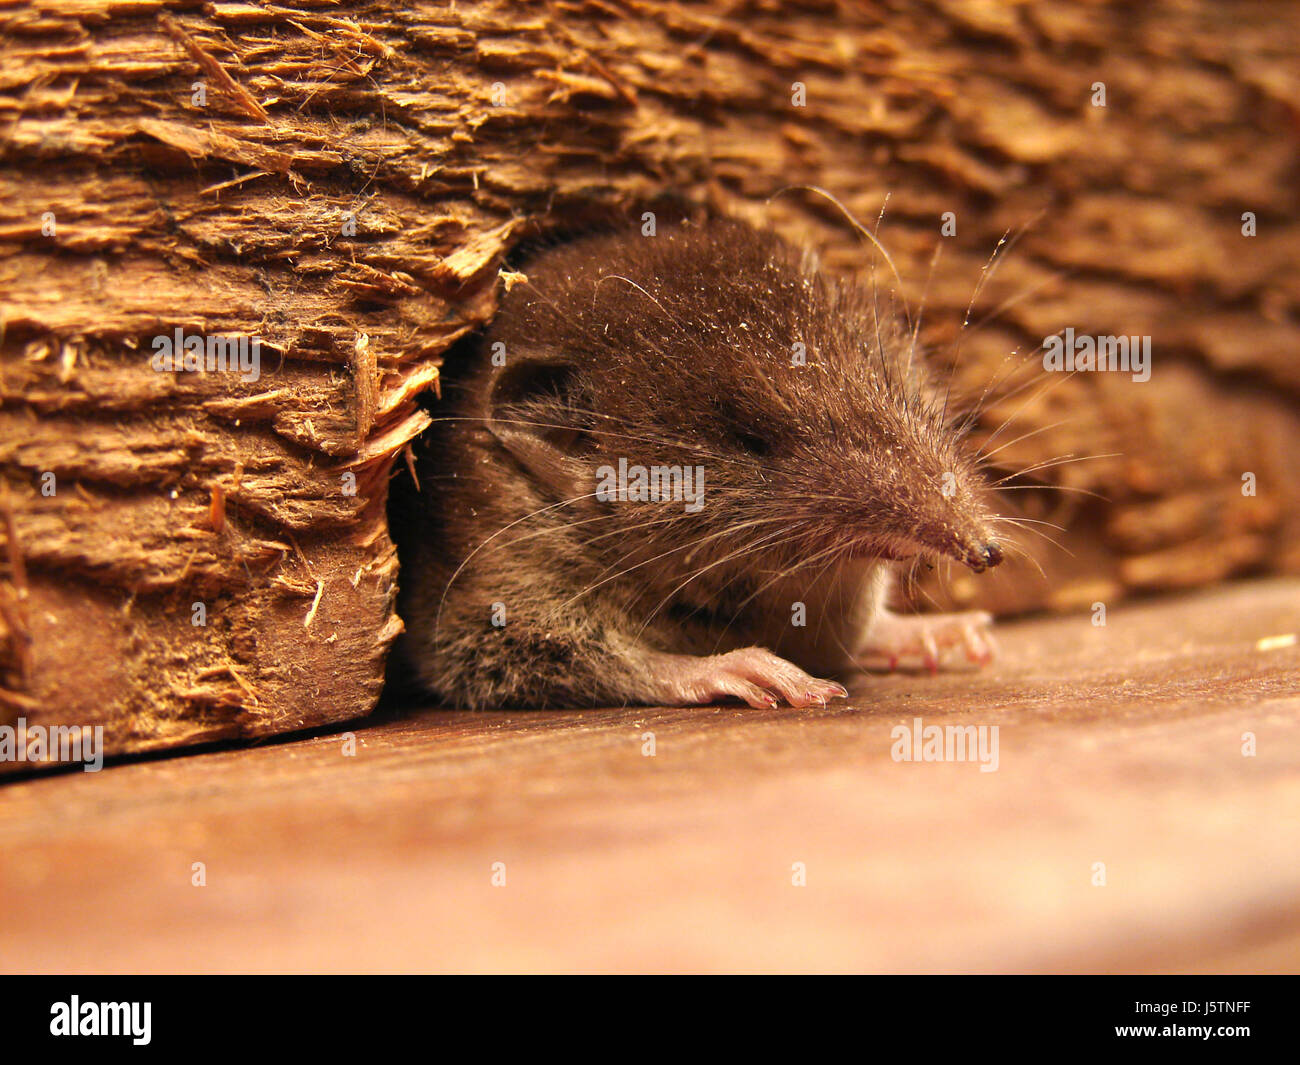 entrance,visit,insectivore,insectivorous,shrew,lodger,mousehole,winterquartier Stock Photo